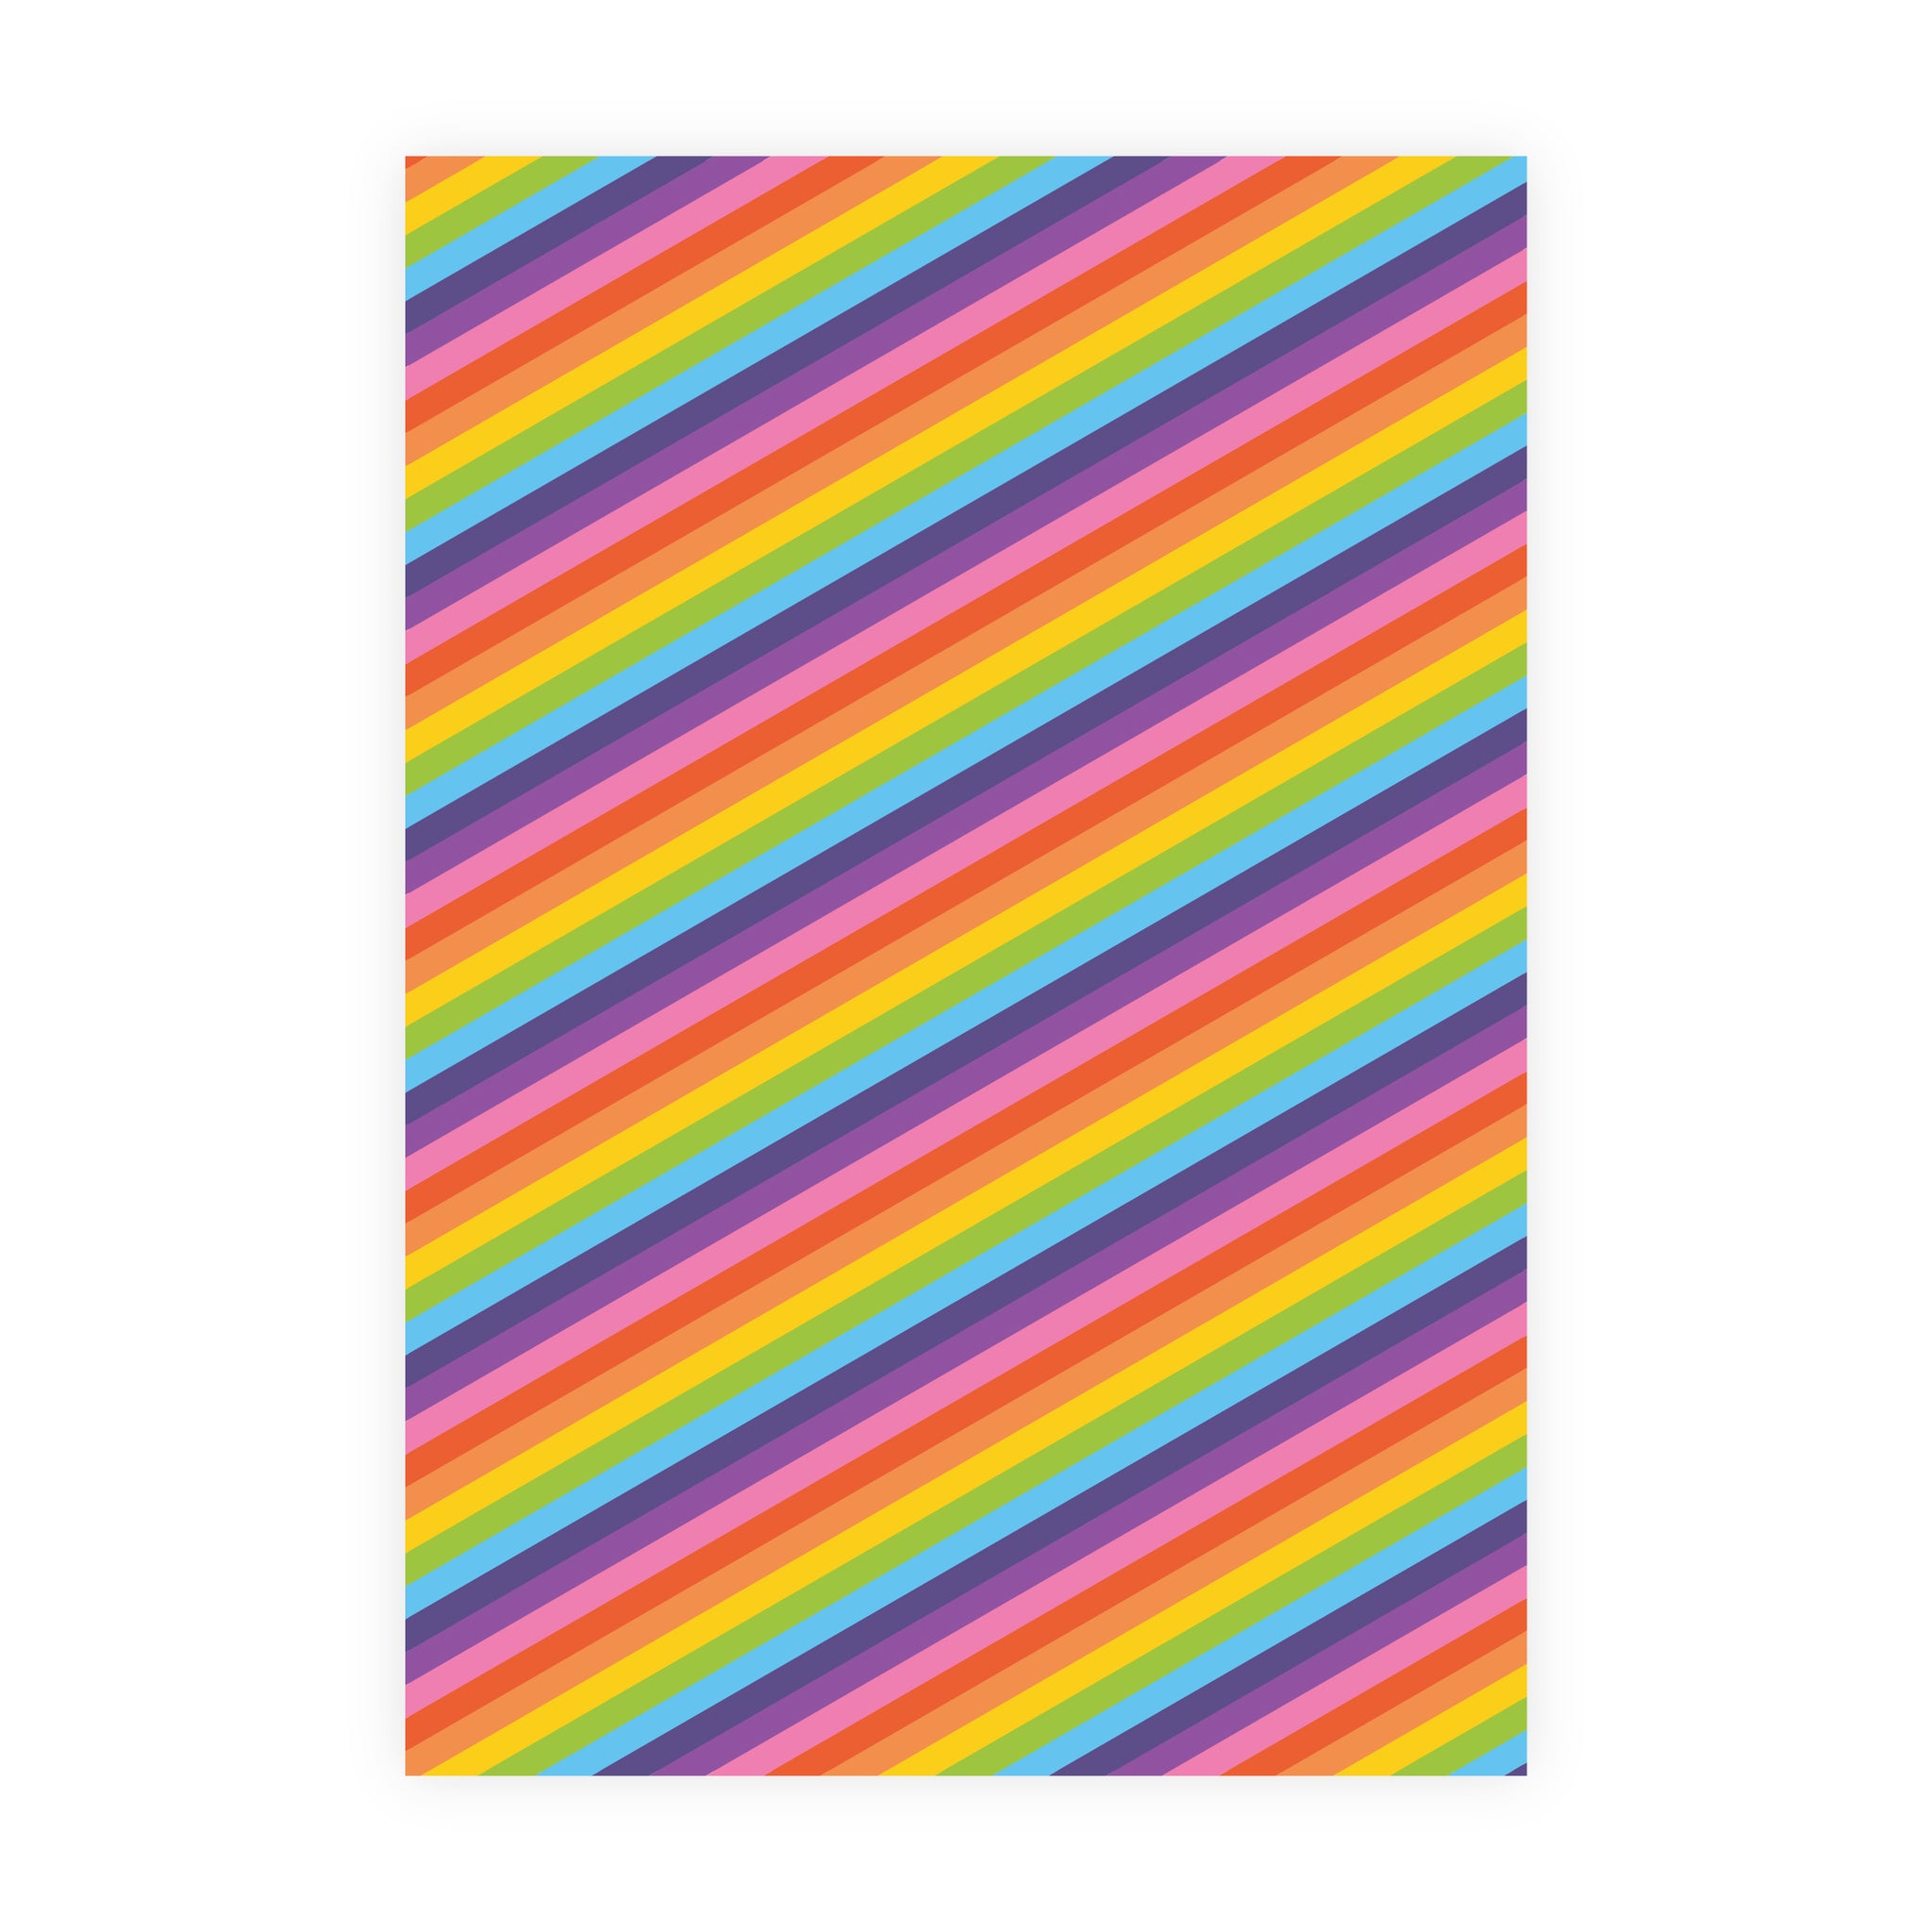 Decor Store 6 Sheet Wrapping Paper Rainbow Stripe Pattern All